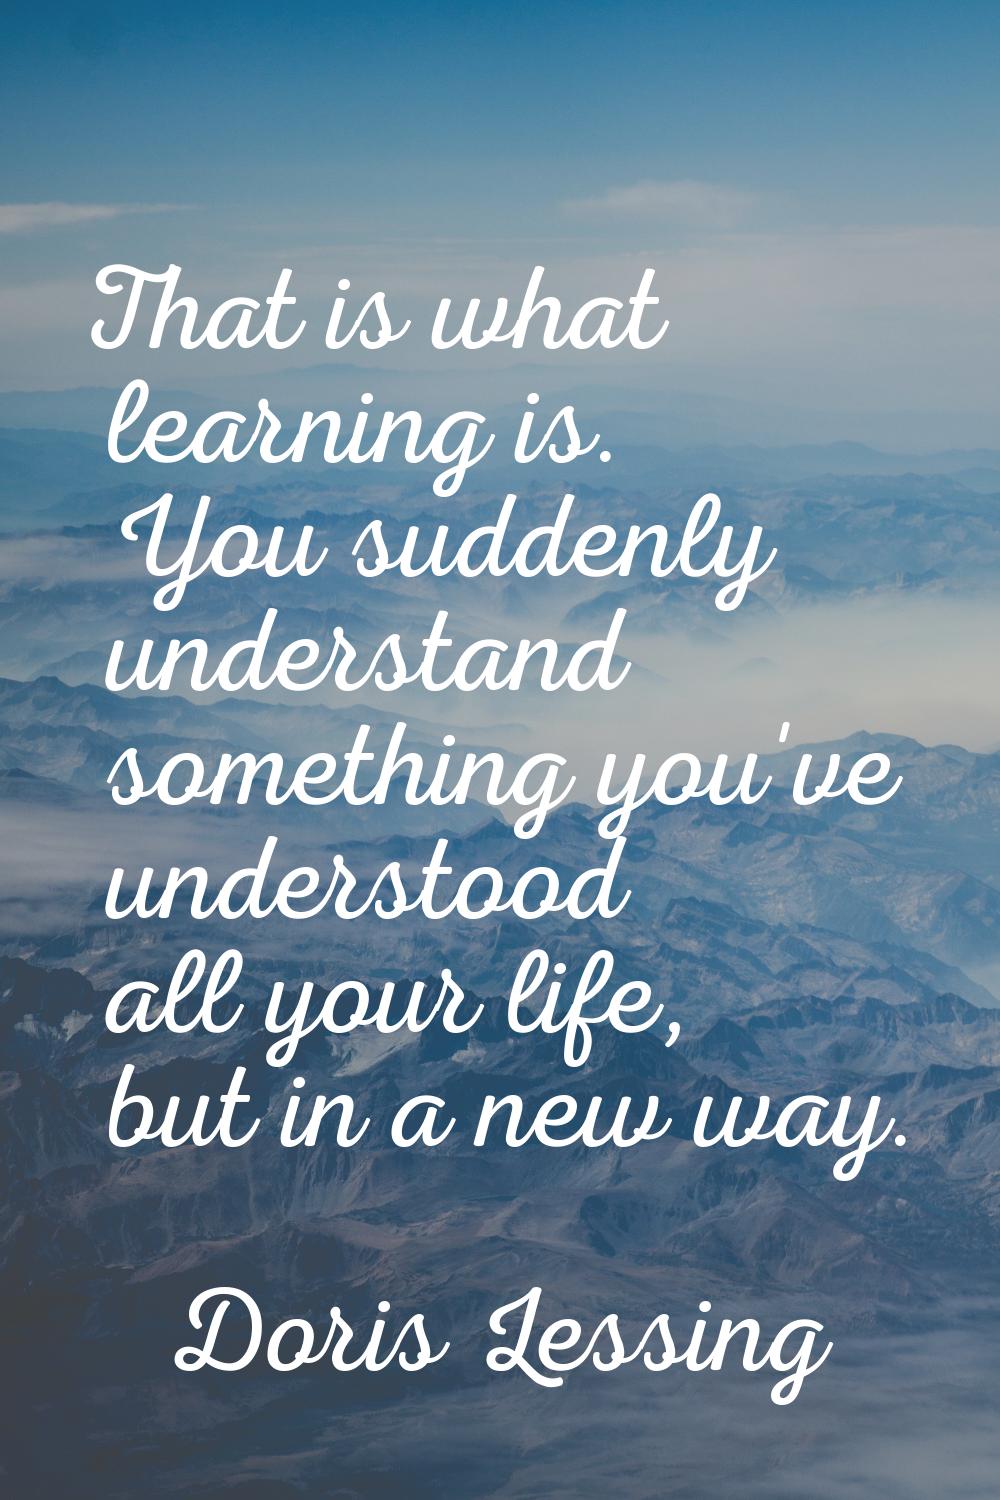 That is what learning is. You suddenly understand something you've understood all your life, but in